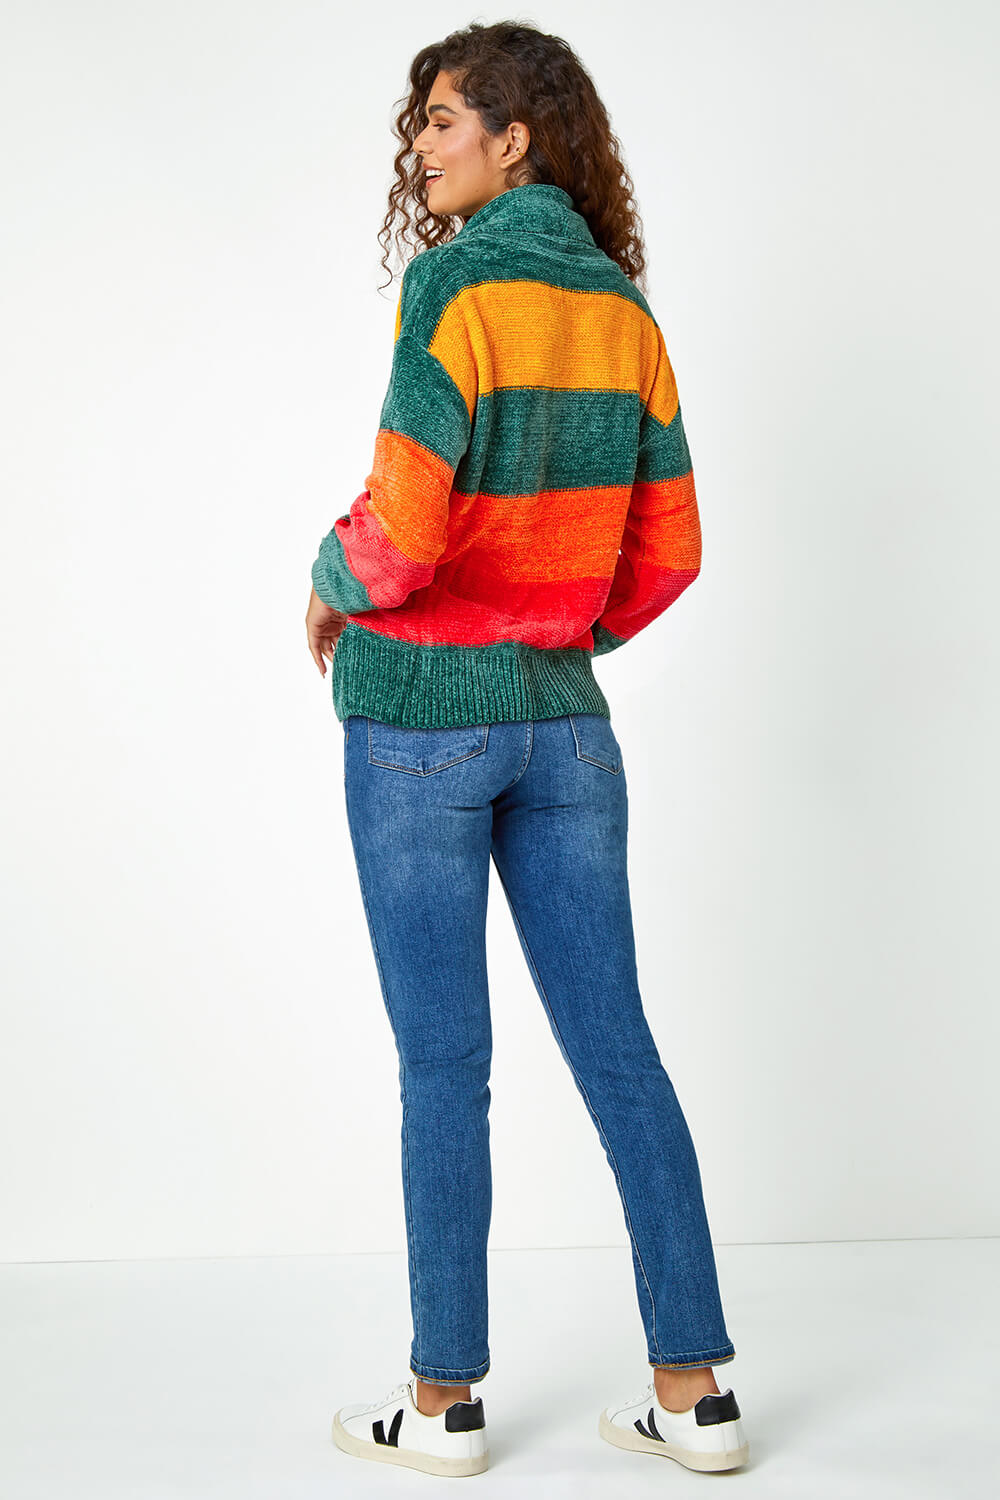 Green Chenille Striped Cowl Neck Jumper, Image 3 of 5